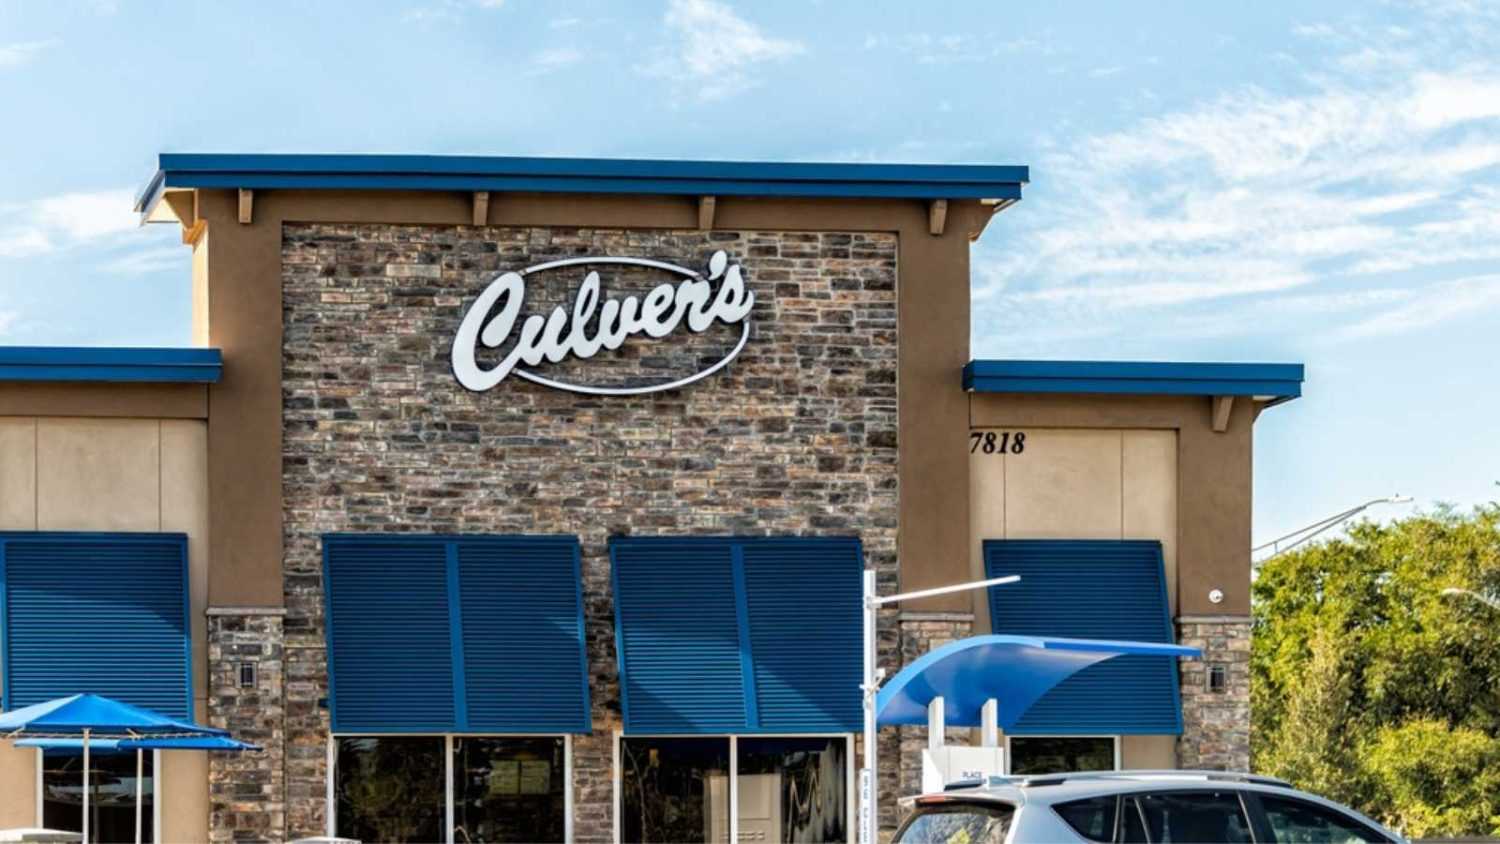 Jacksonville, USA - October 19, 2021: Sign on building for Culver's chain restaurant for casual fast food serving butter burgers and frozen custard ice cream in Florida exterior with nobody